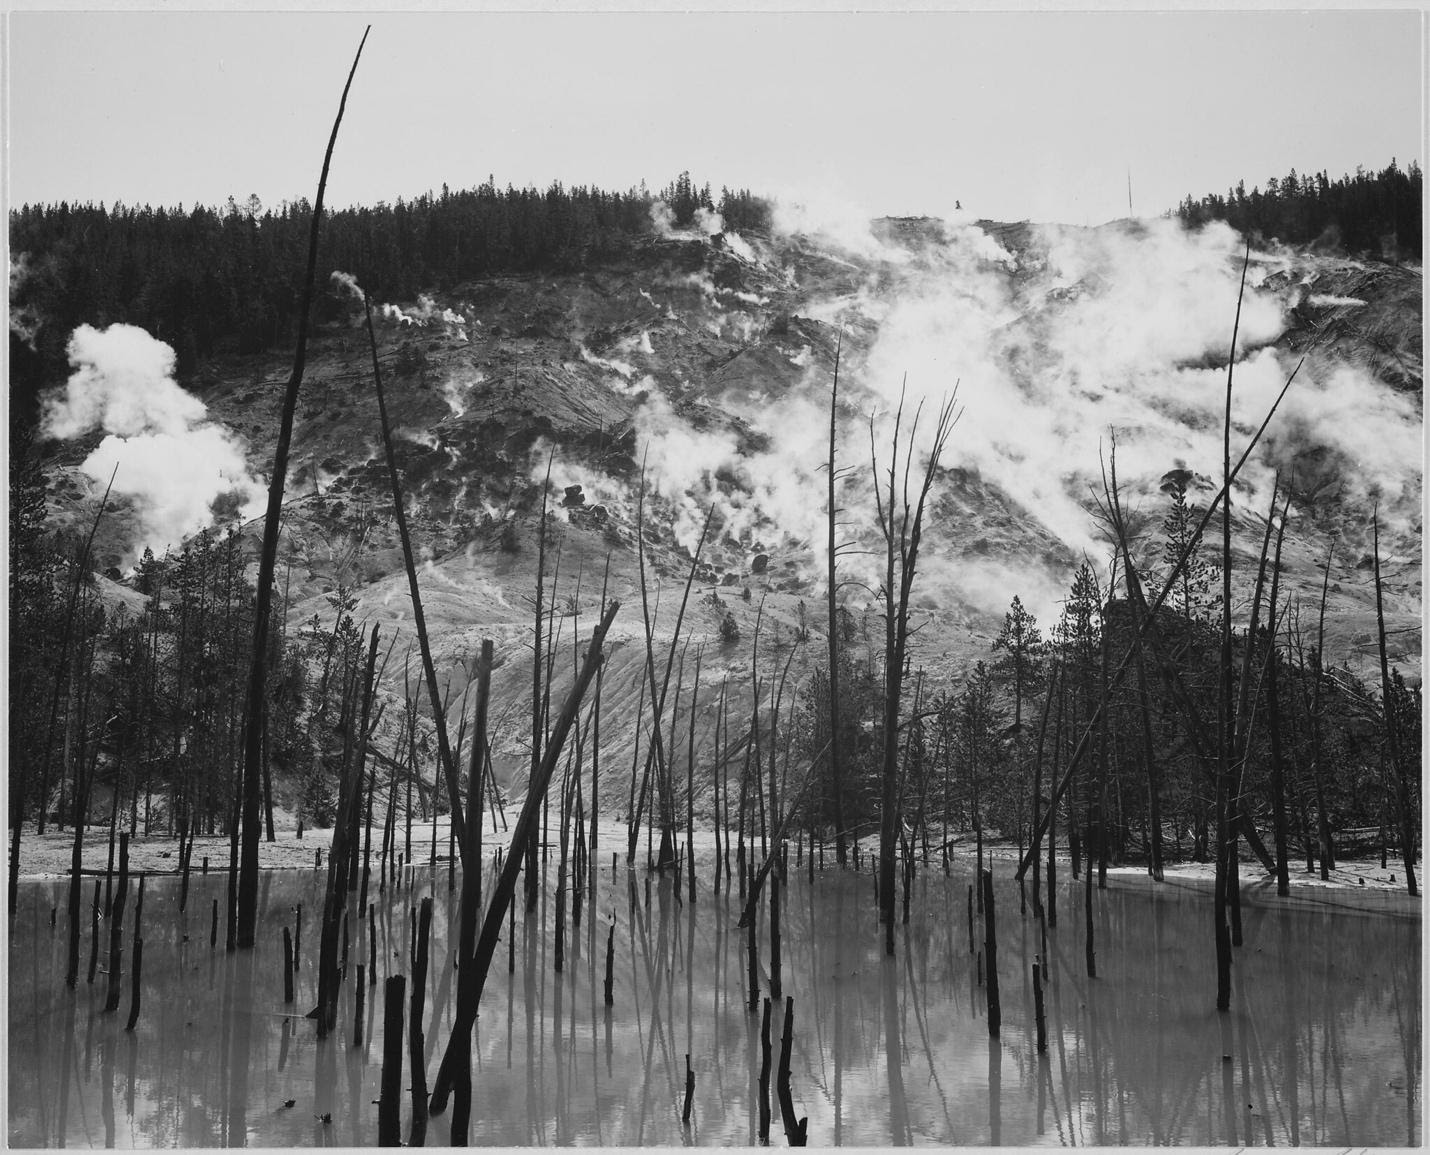 Barren tree trunks rising from water in foreground, stream rising from mountains in background, "Roaring Mountain, Yellowstone National Park," Wyoming. Ansel Adams